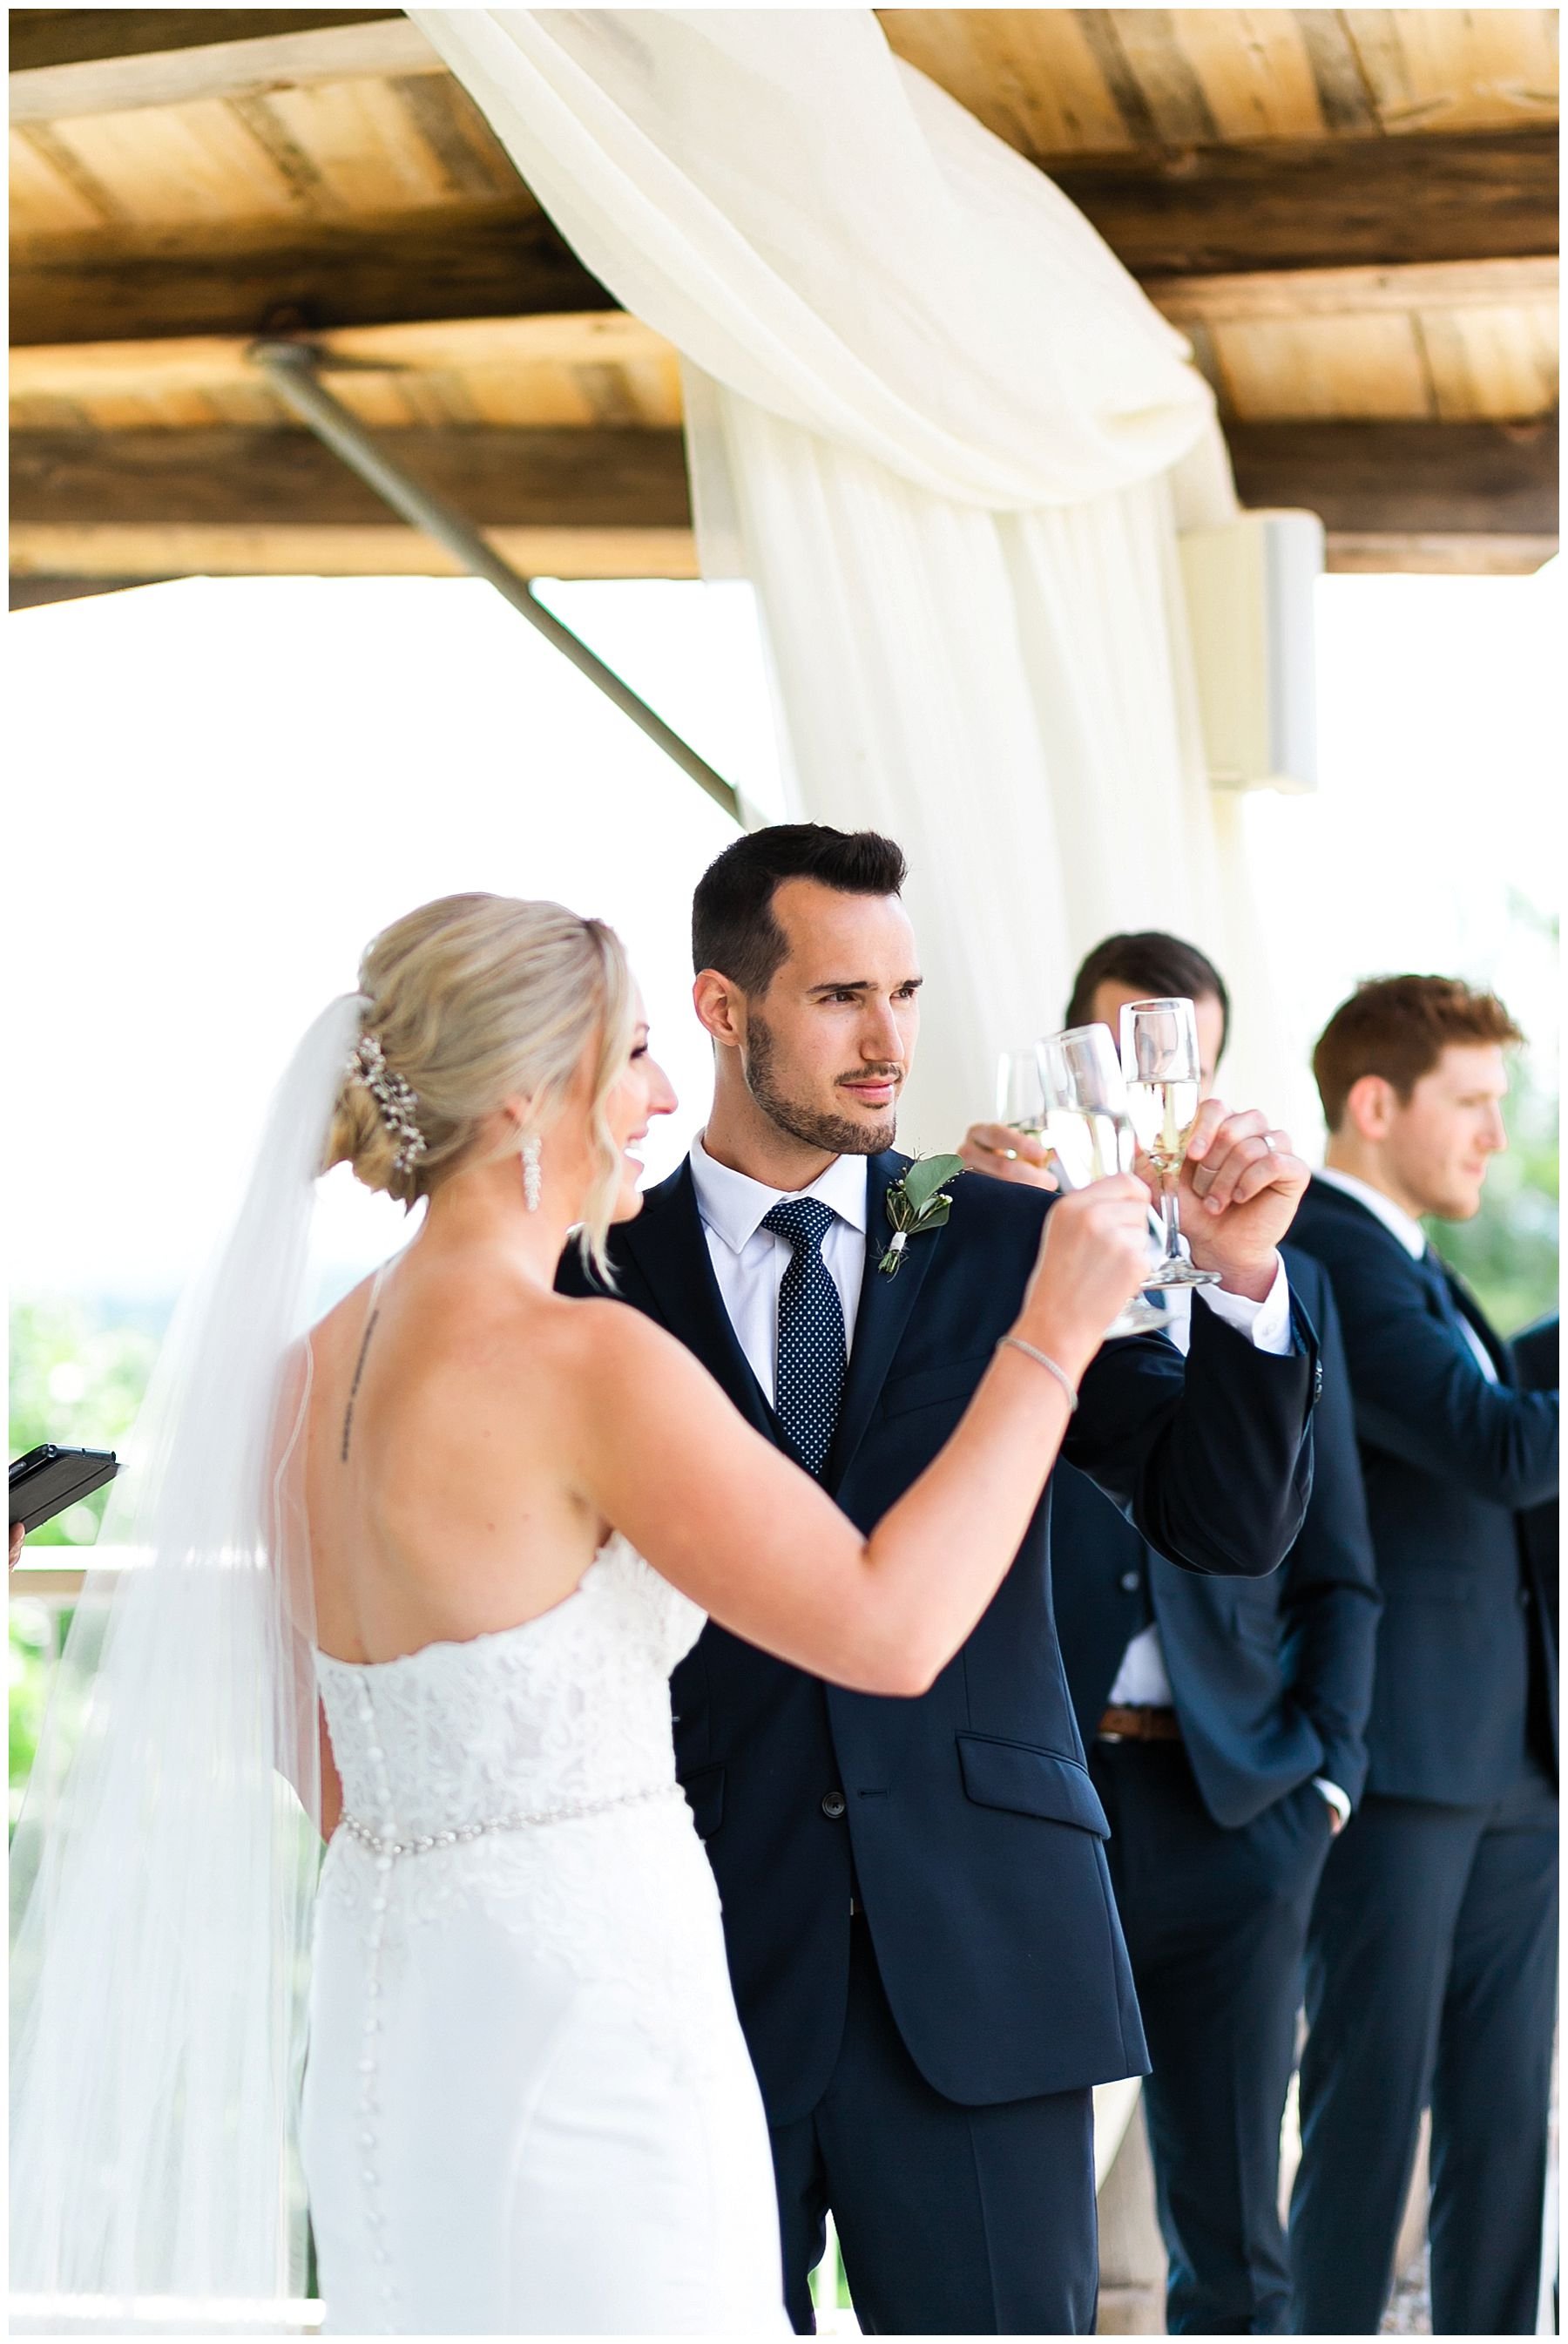 Bride and groom champagne toast during ceremony 